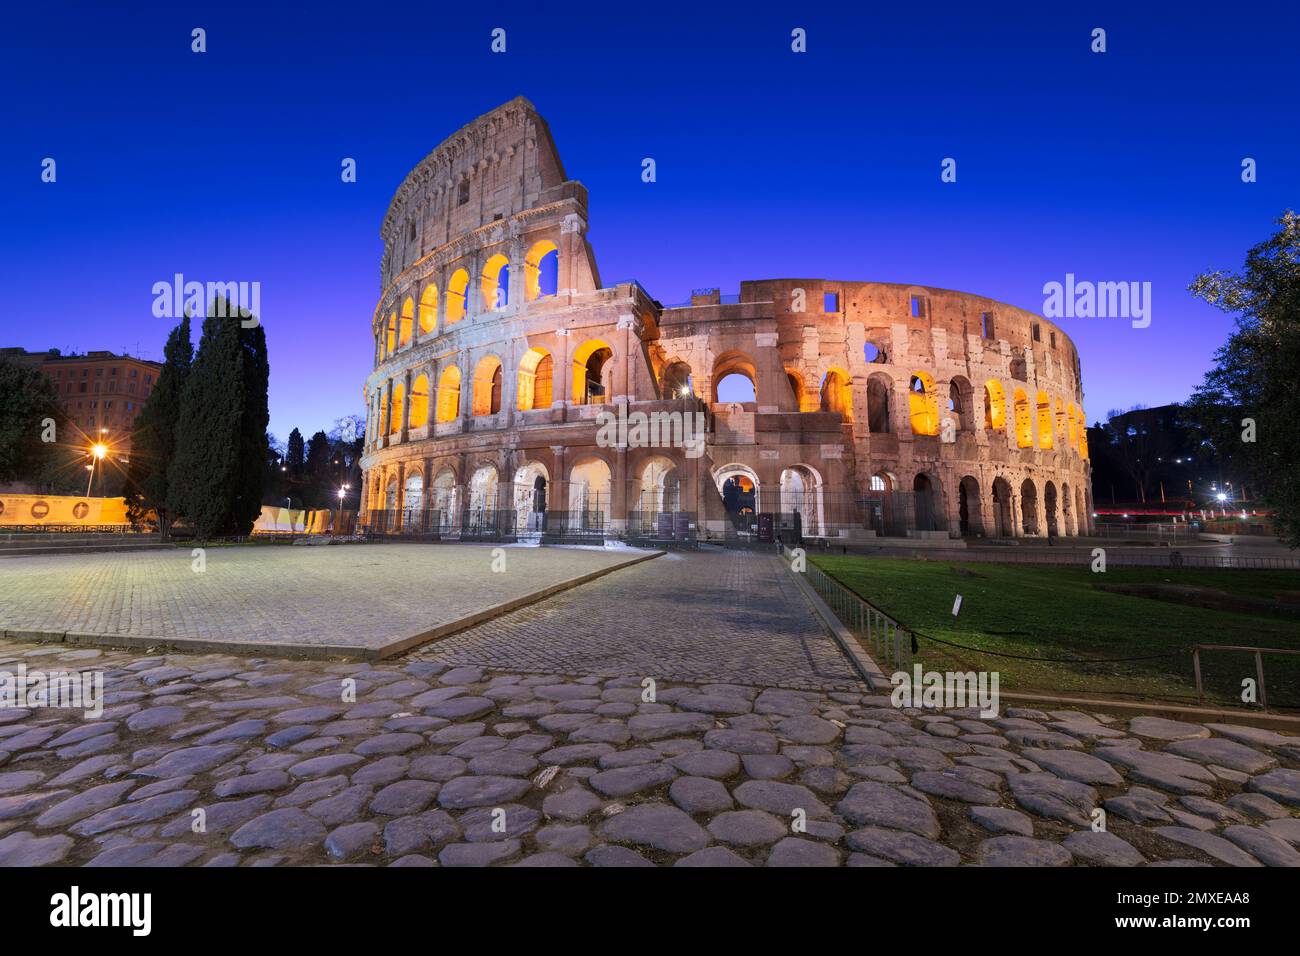 The Colosseum in Rome, Italy during blue hour. Stock Photo